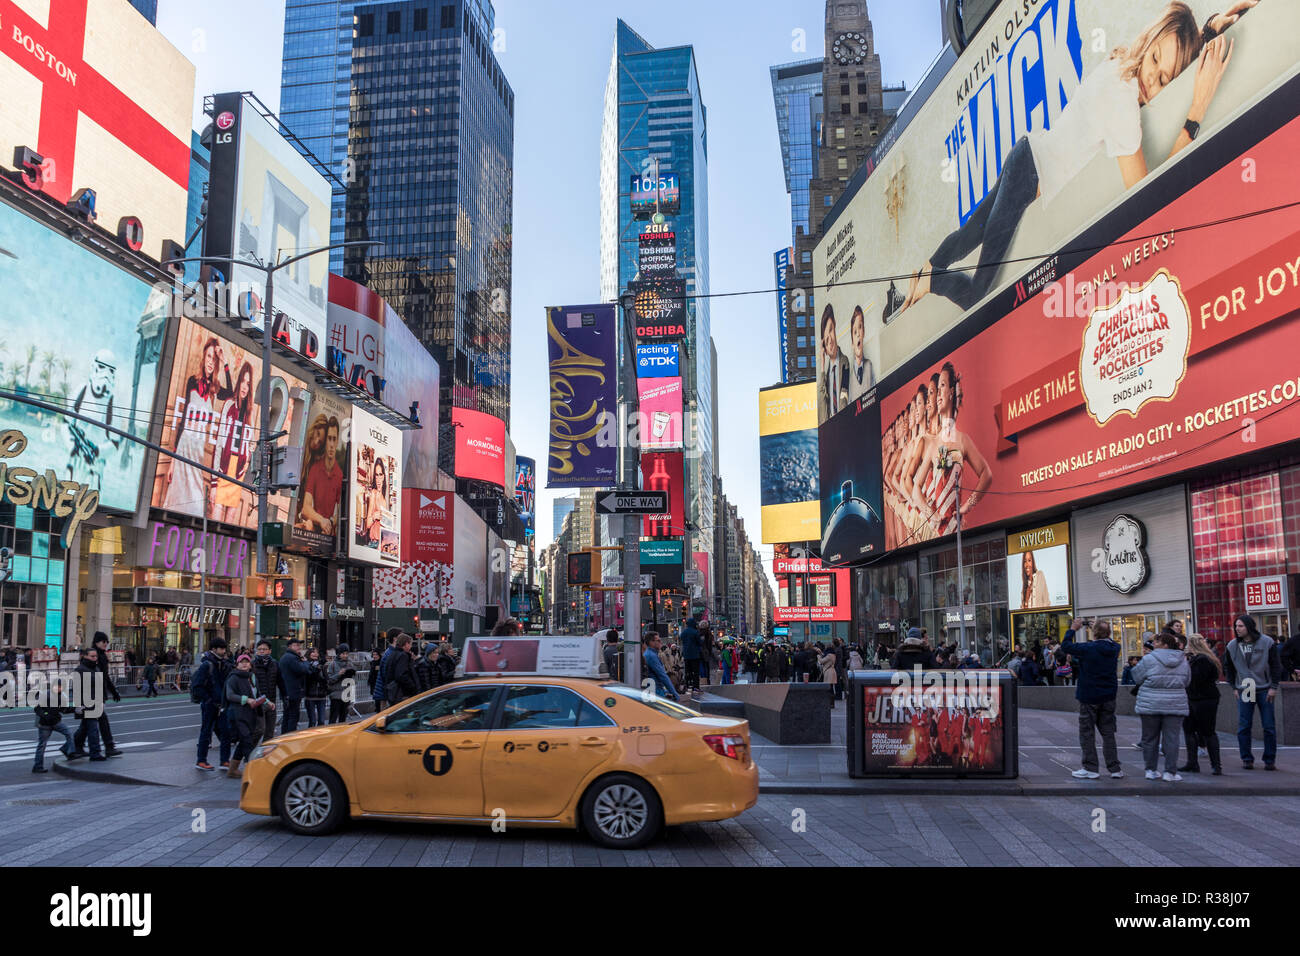 New York City, USA - December 25 2016: View TIme Square a yellow taxi cab driving by, a crowd of people walking by on the sidewalk, and advertising si Stock Photo